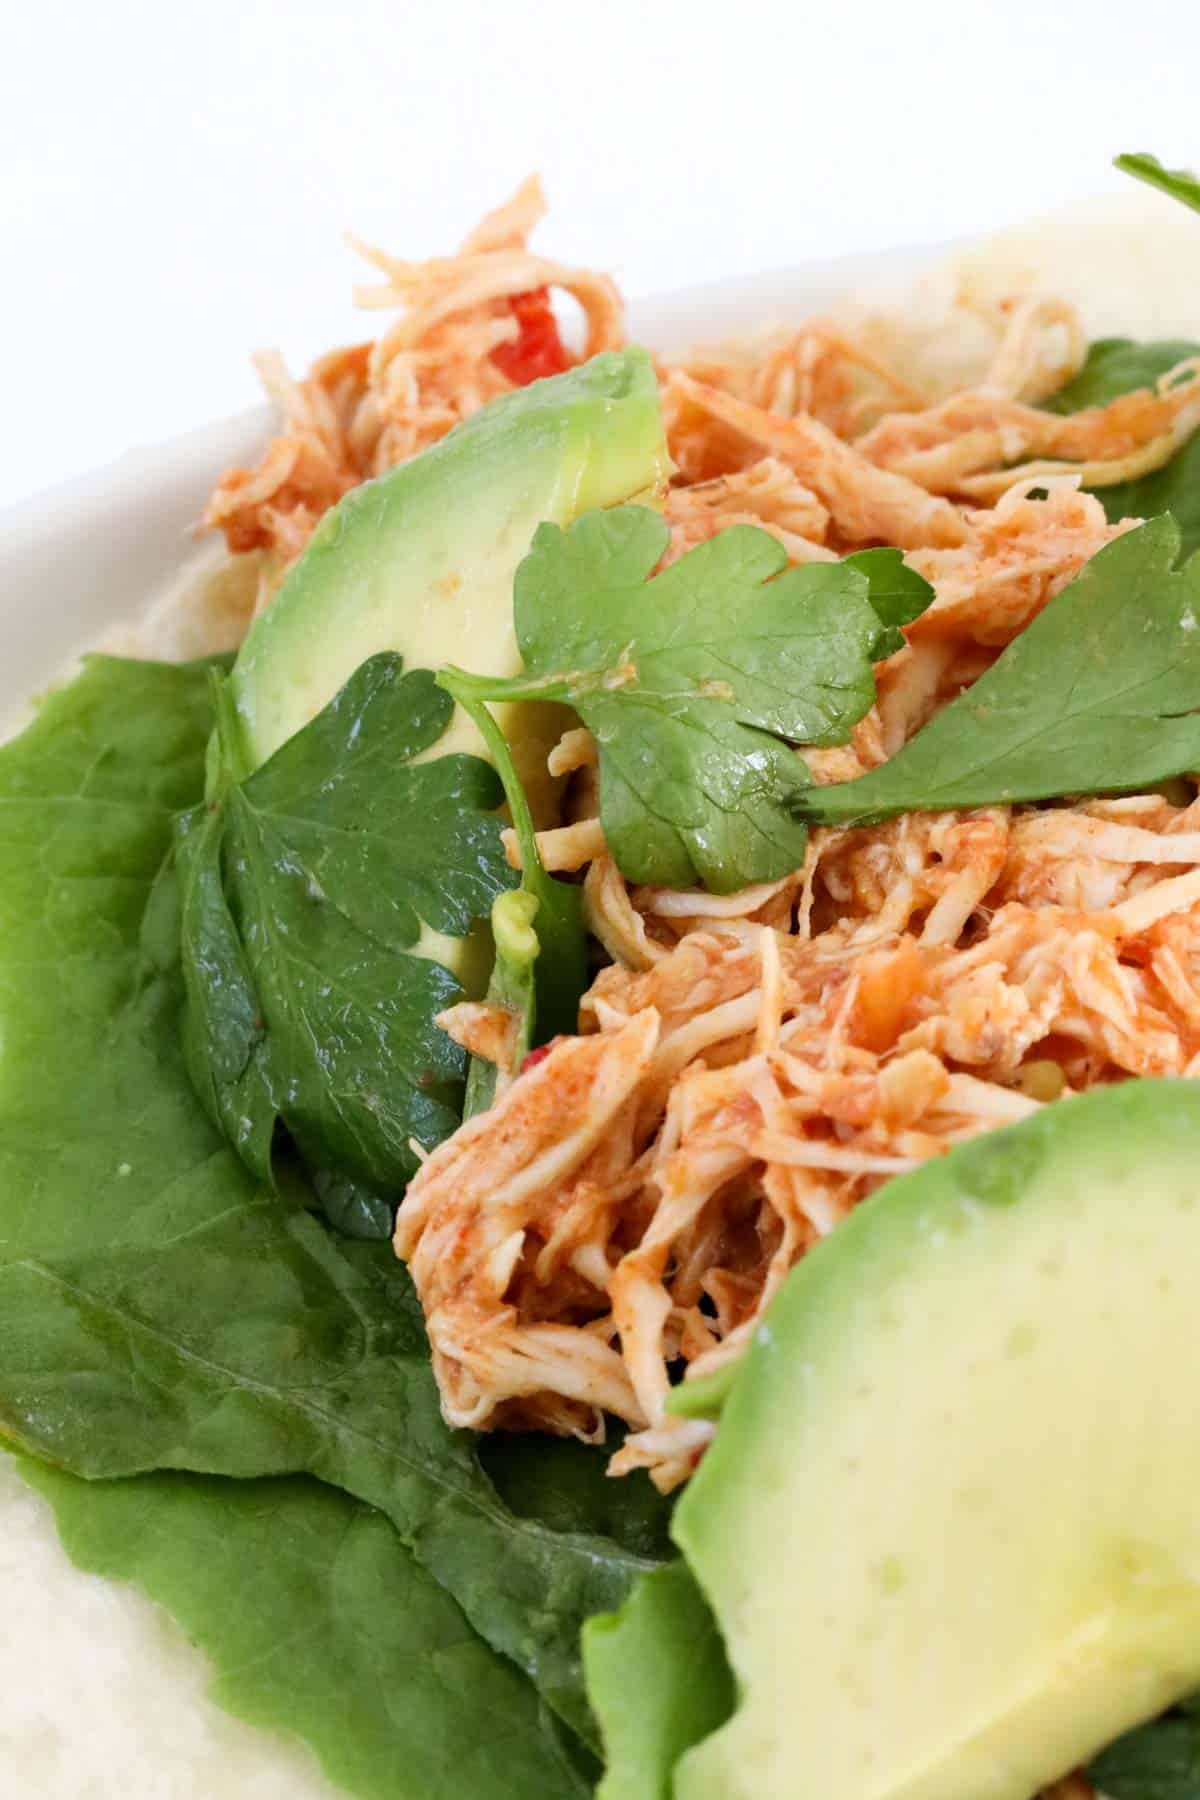 Mexican shredded chicken with parsley leaves and sliced avocado on top.